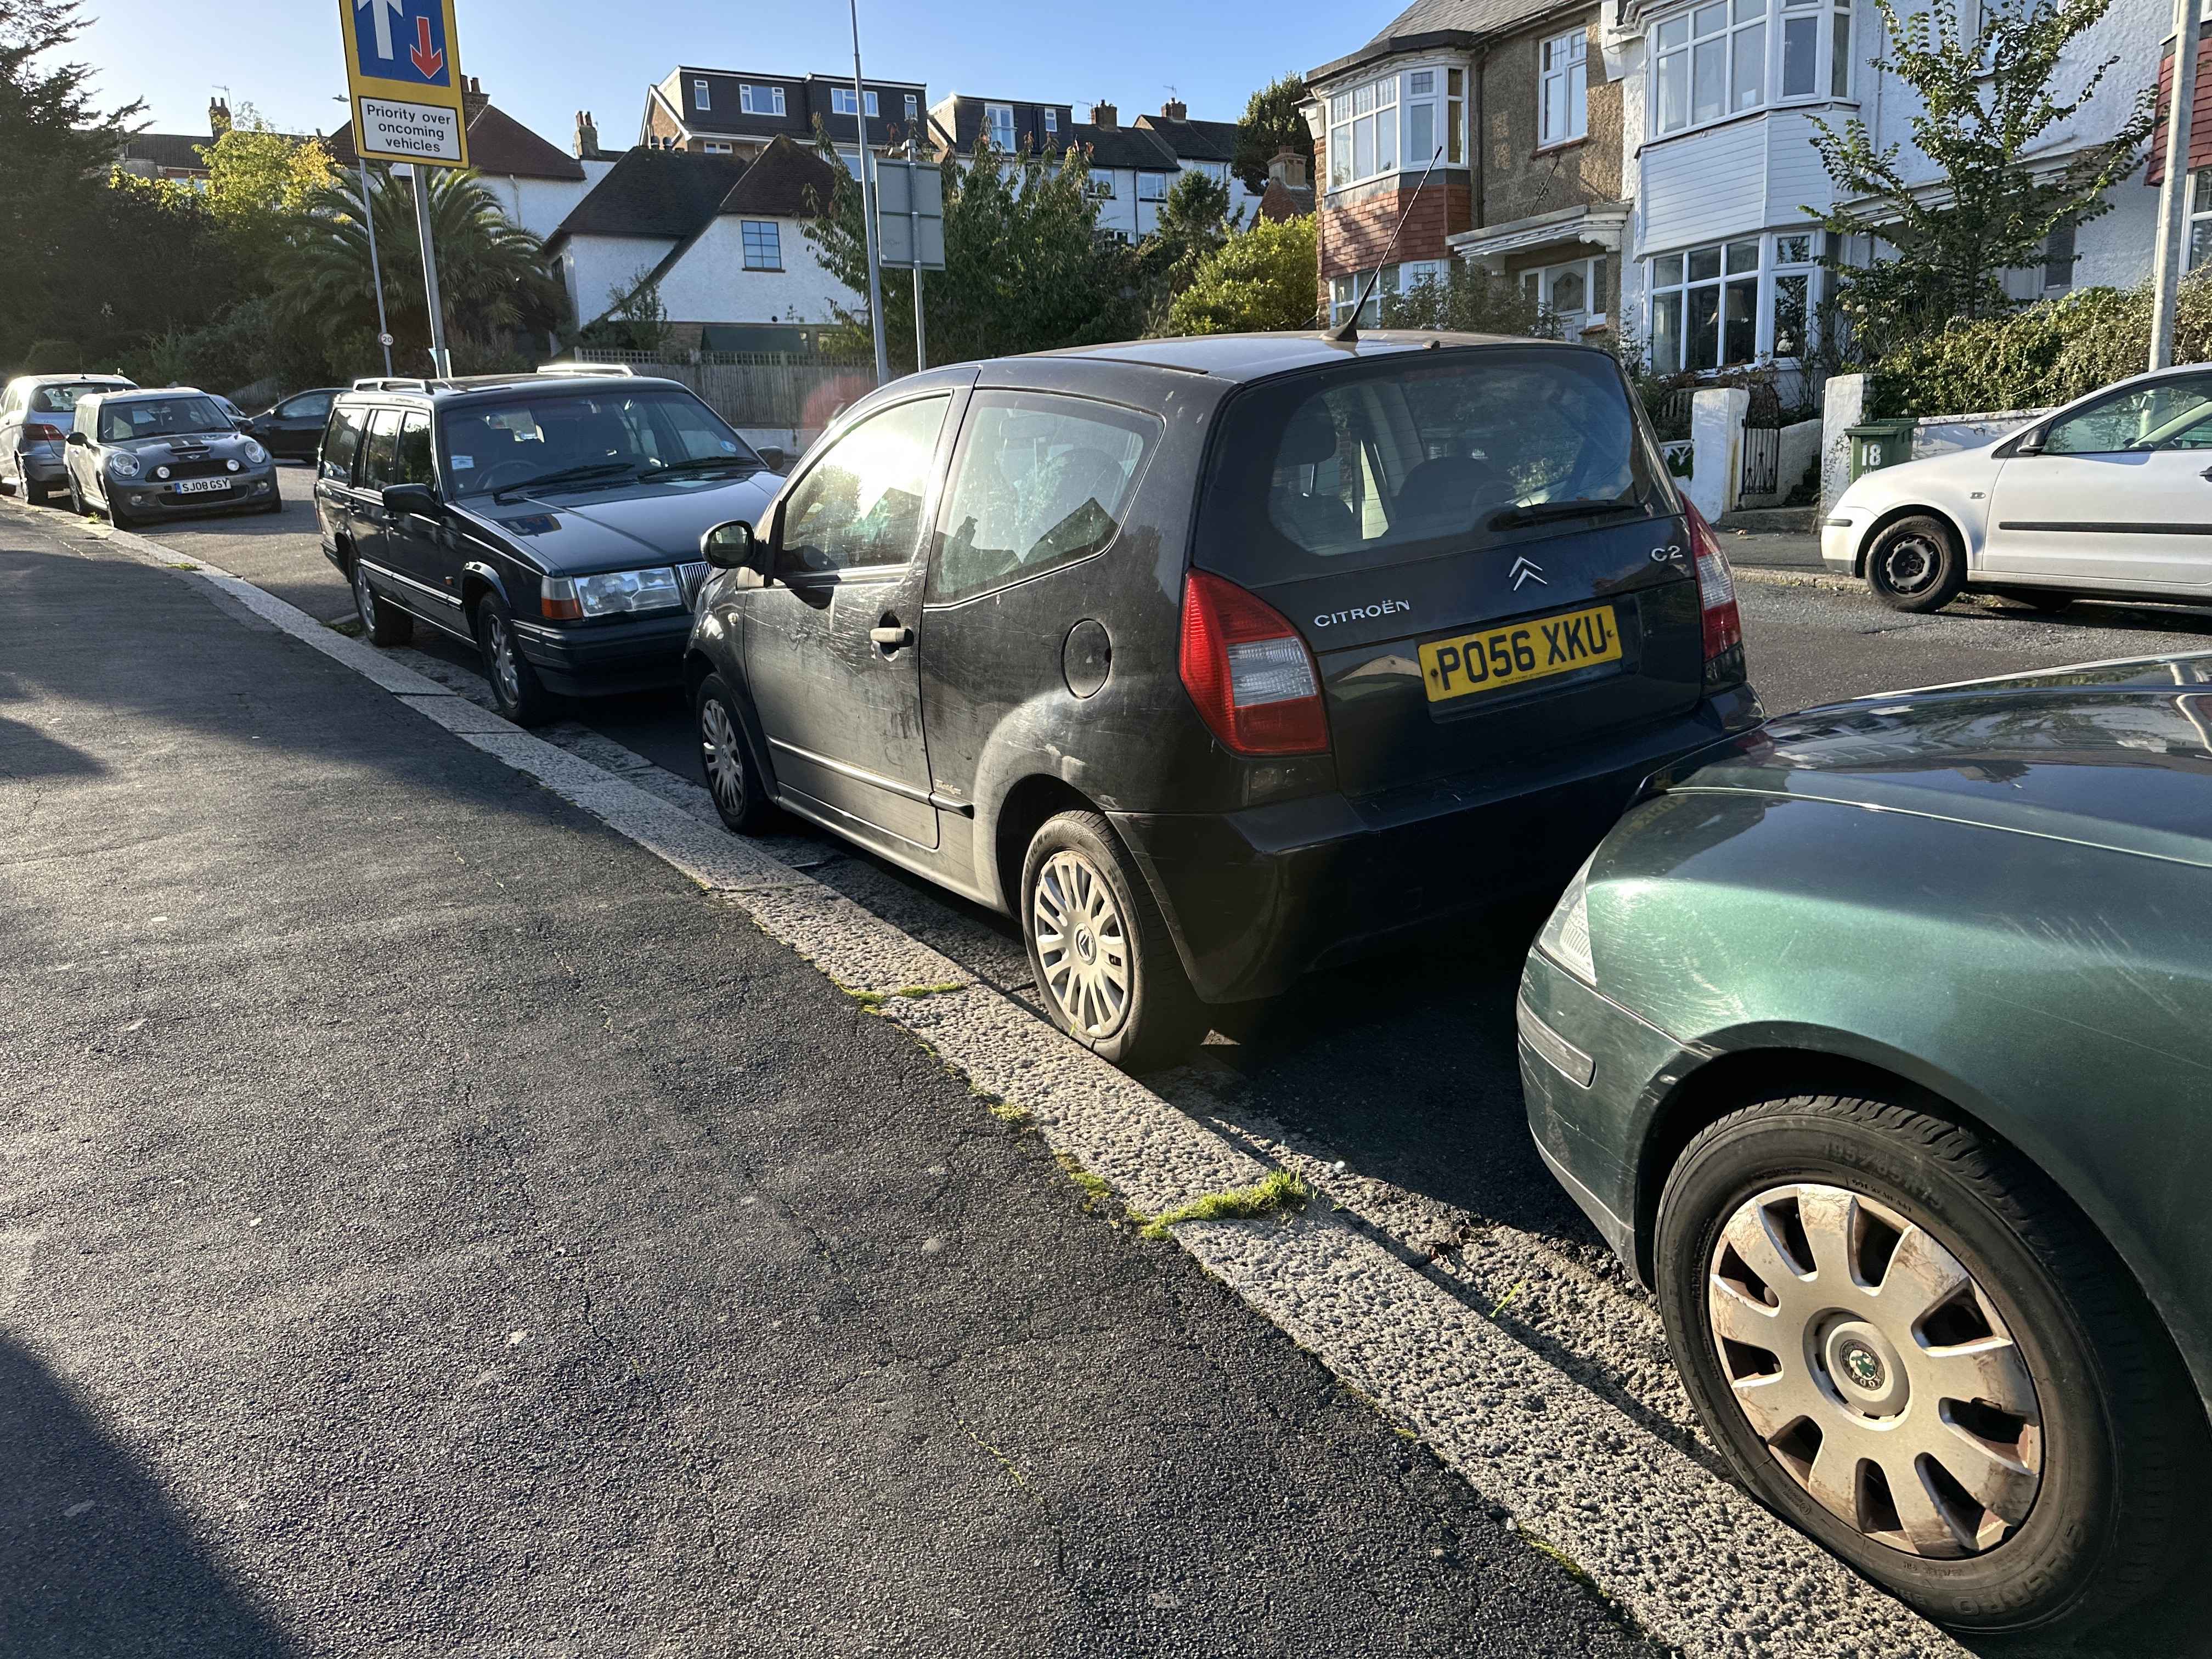 Photograph of PO56 XKU - a Black Citroen C2 parked in Hollingdean by a non-resident. The second of five photographs supplied by the residents of Hollingdean.